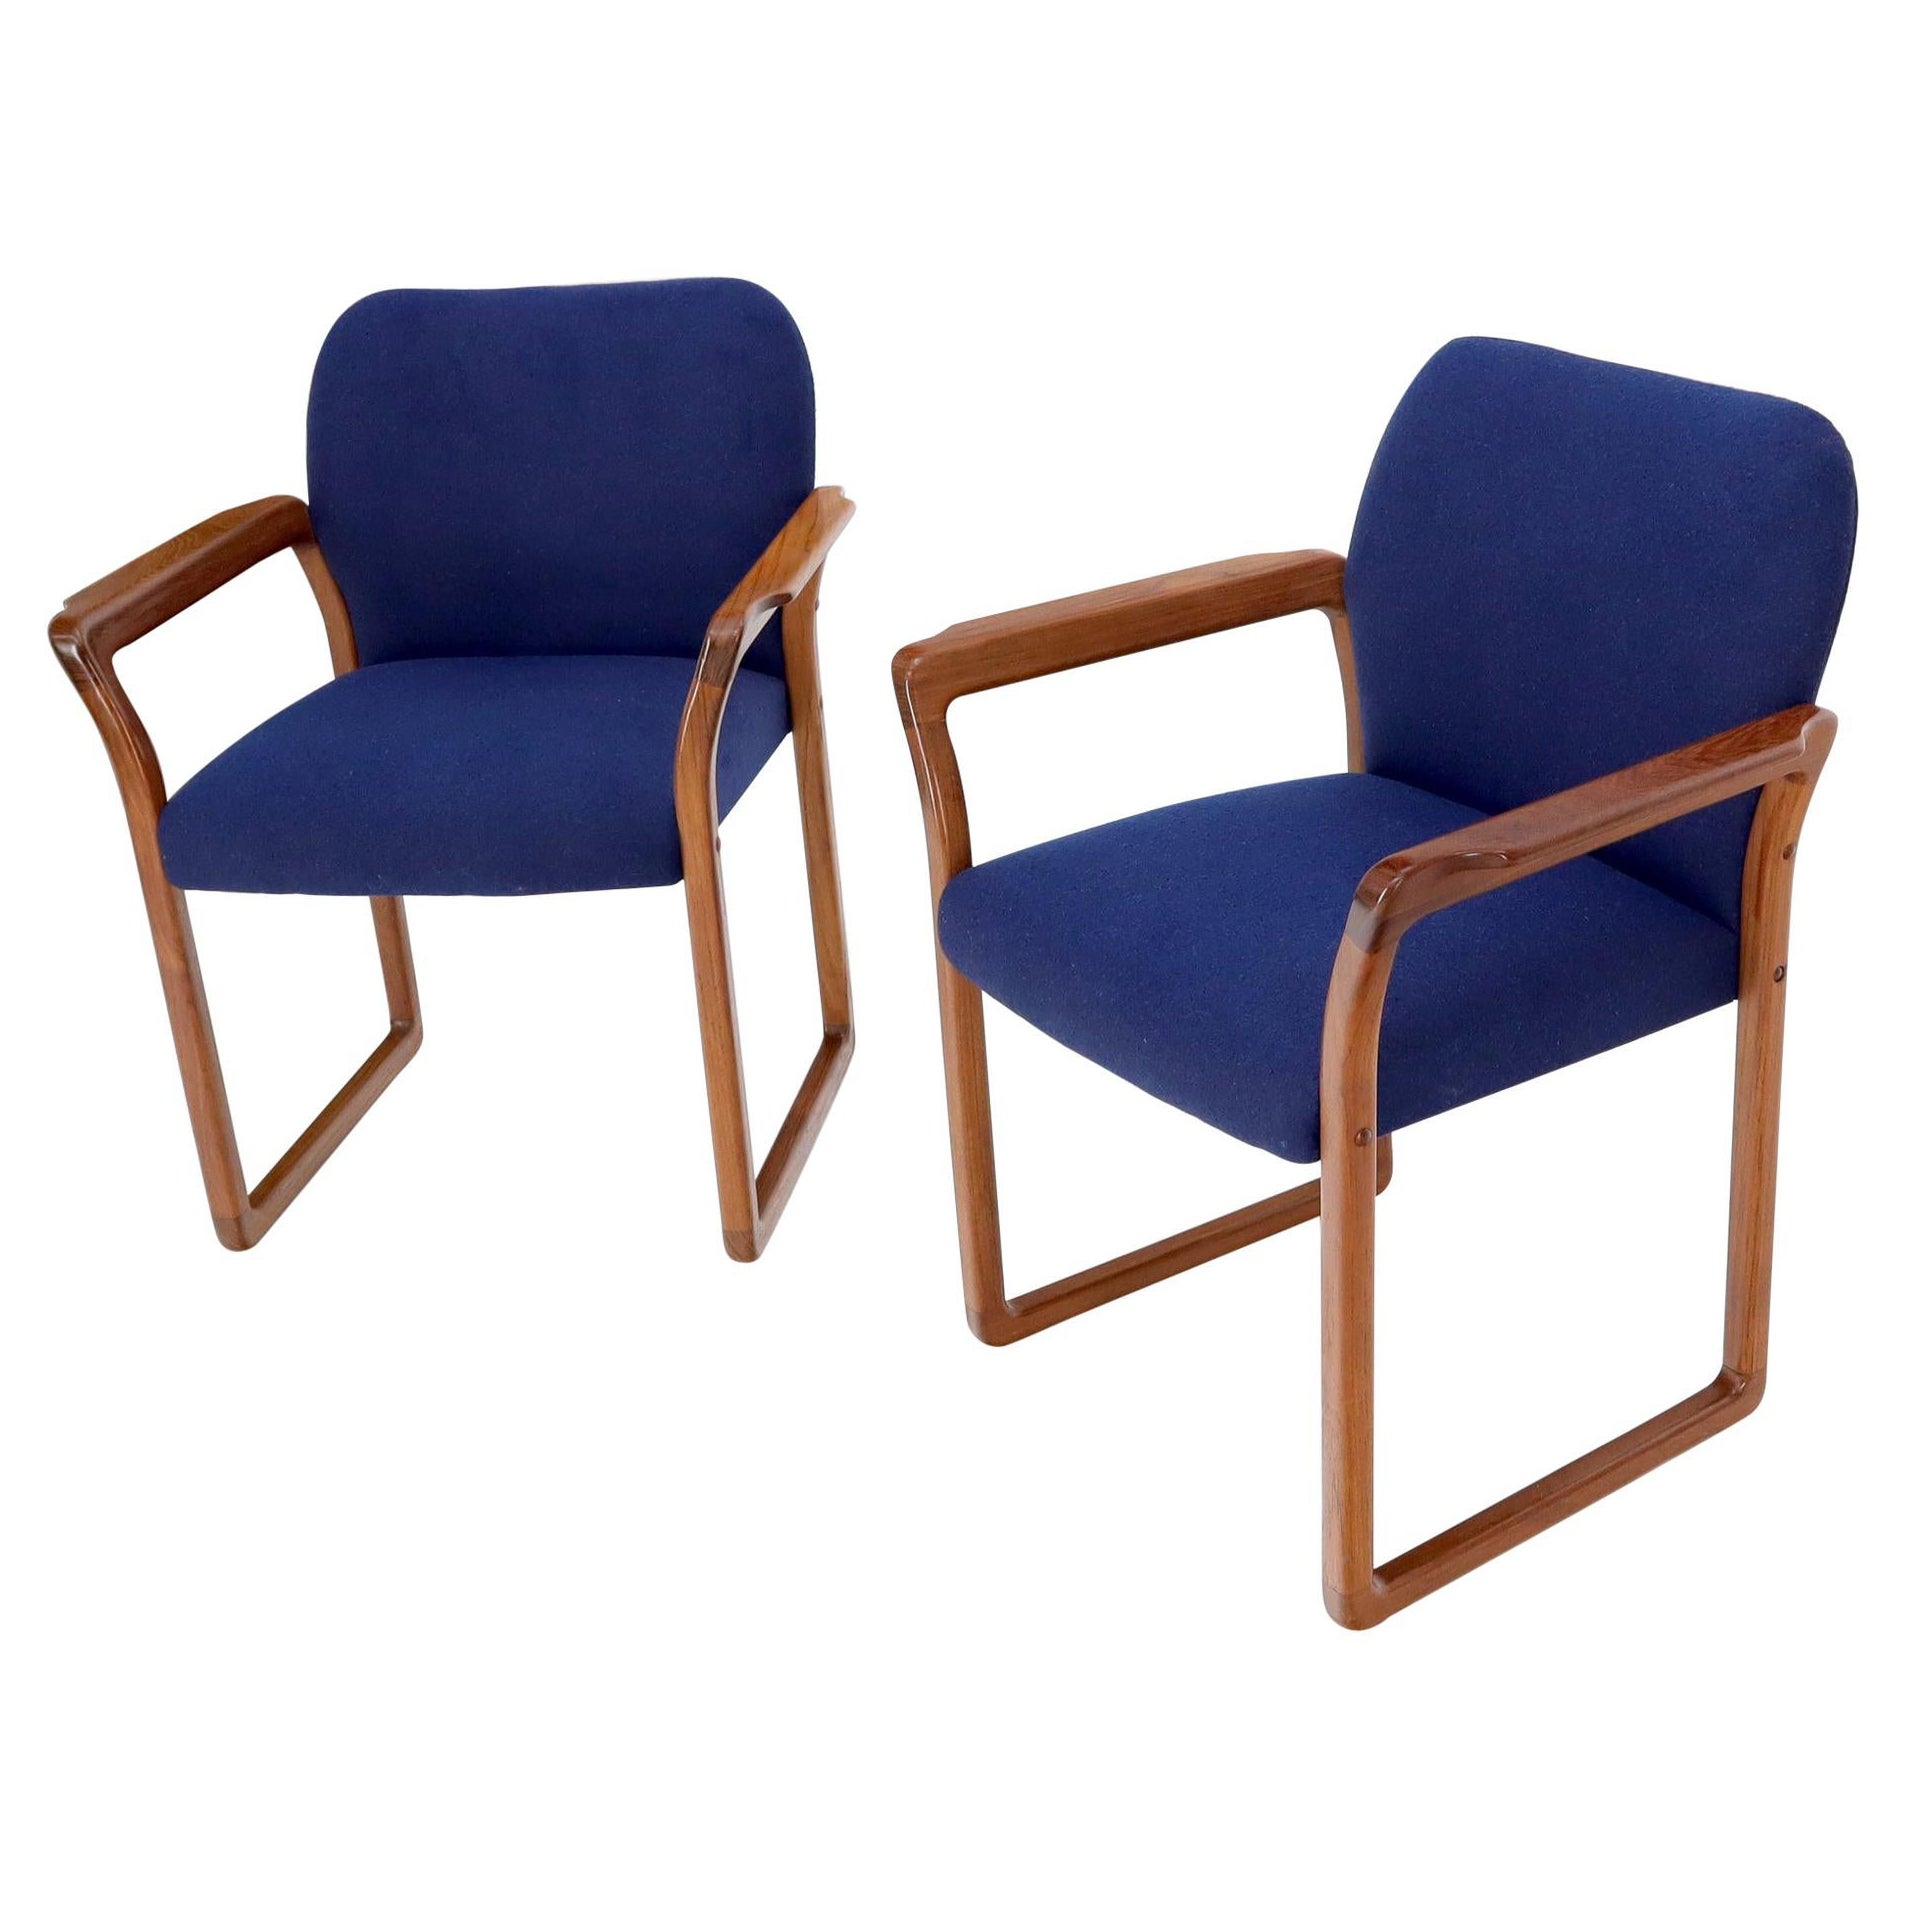 Pair of Danish Mid-Century Modern Teak Arms Chairs New Wool Upholstery For Sale